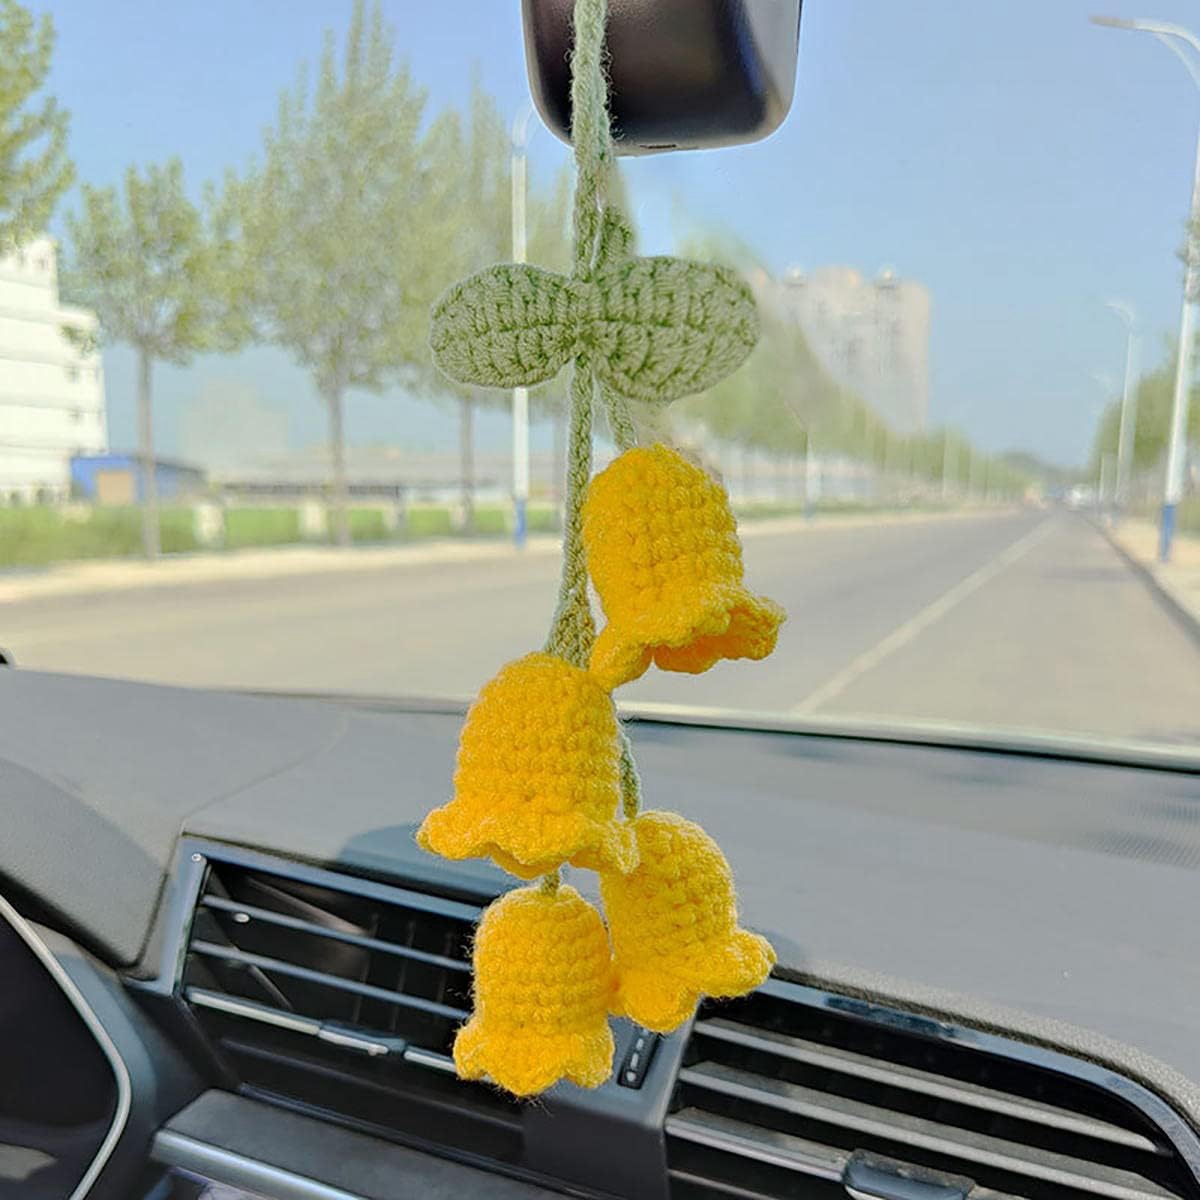 QKHEE Car Mirror Hanging Accessories Cute Car Accessories for Women Interior Six Color Bellflower Hand Knitted Car Rear View Mirror Decor Crochet